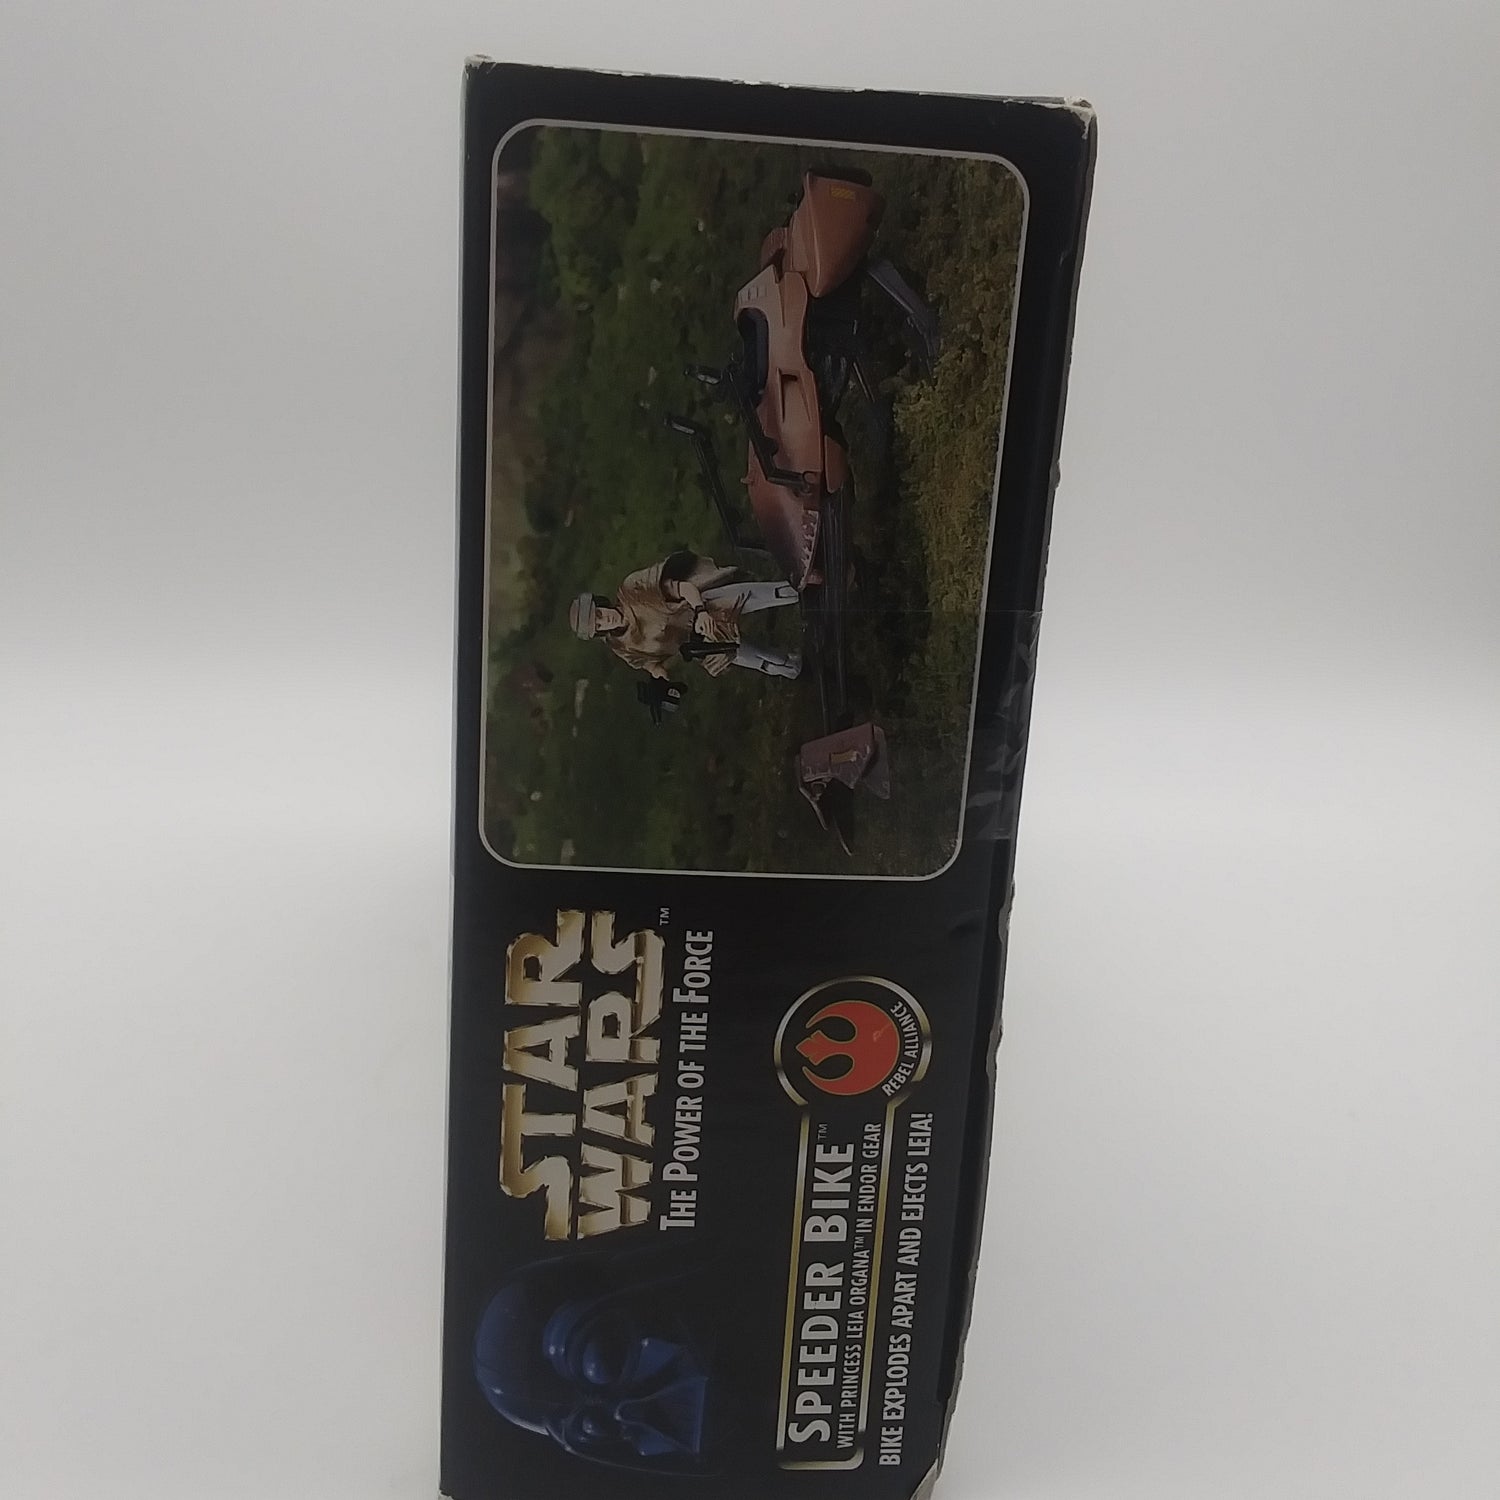 The left side of the box with a picture of the figure and speeder bike